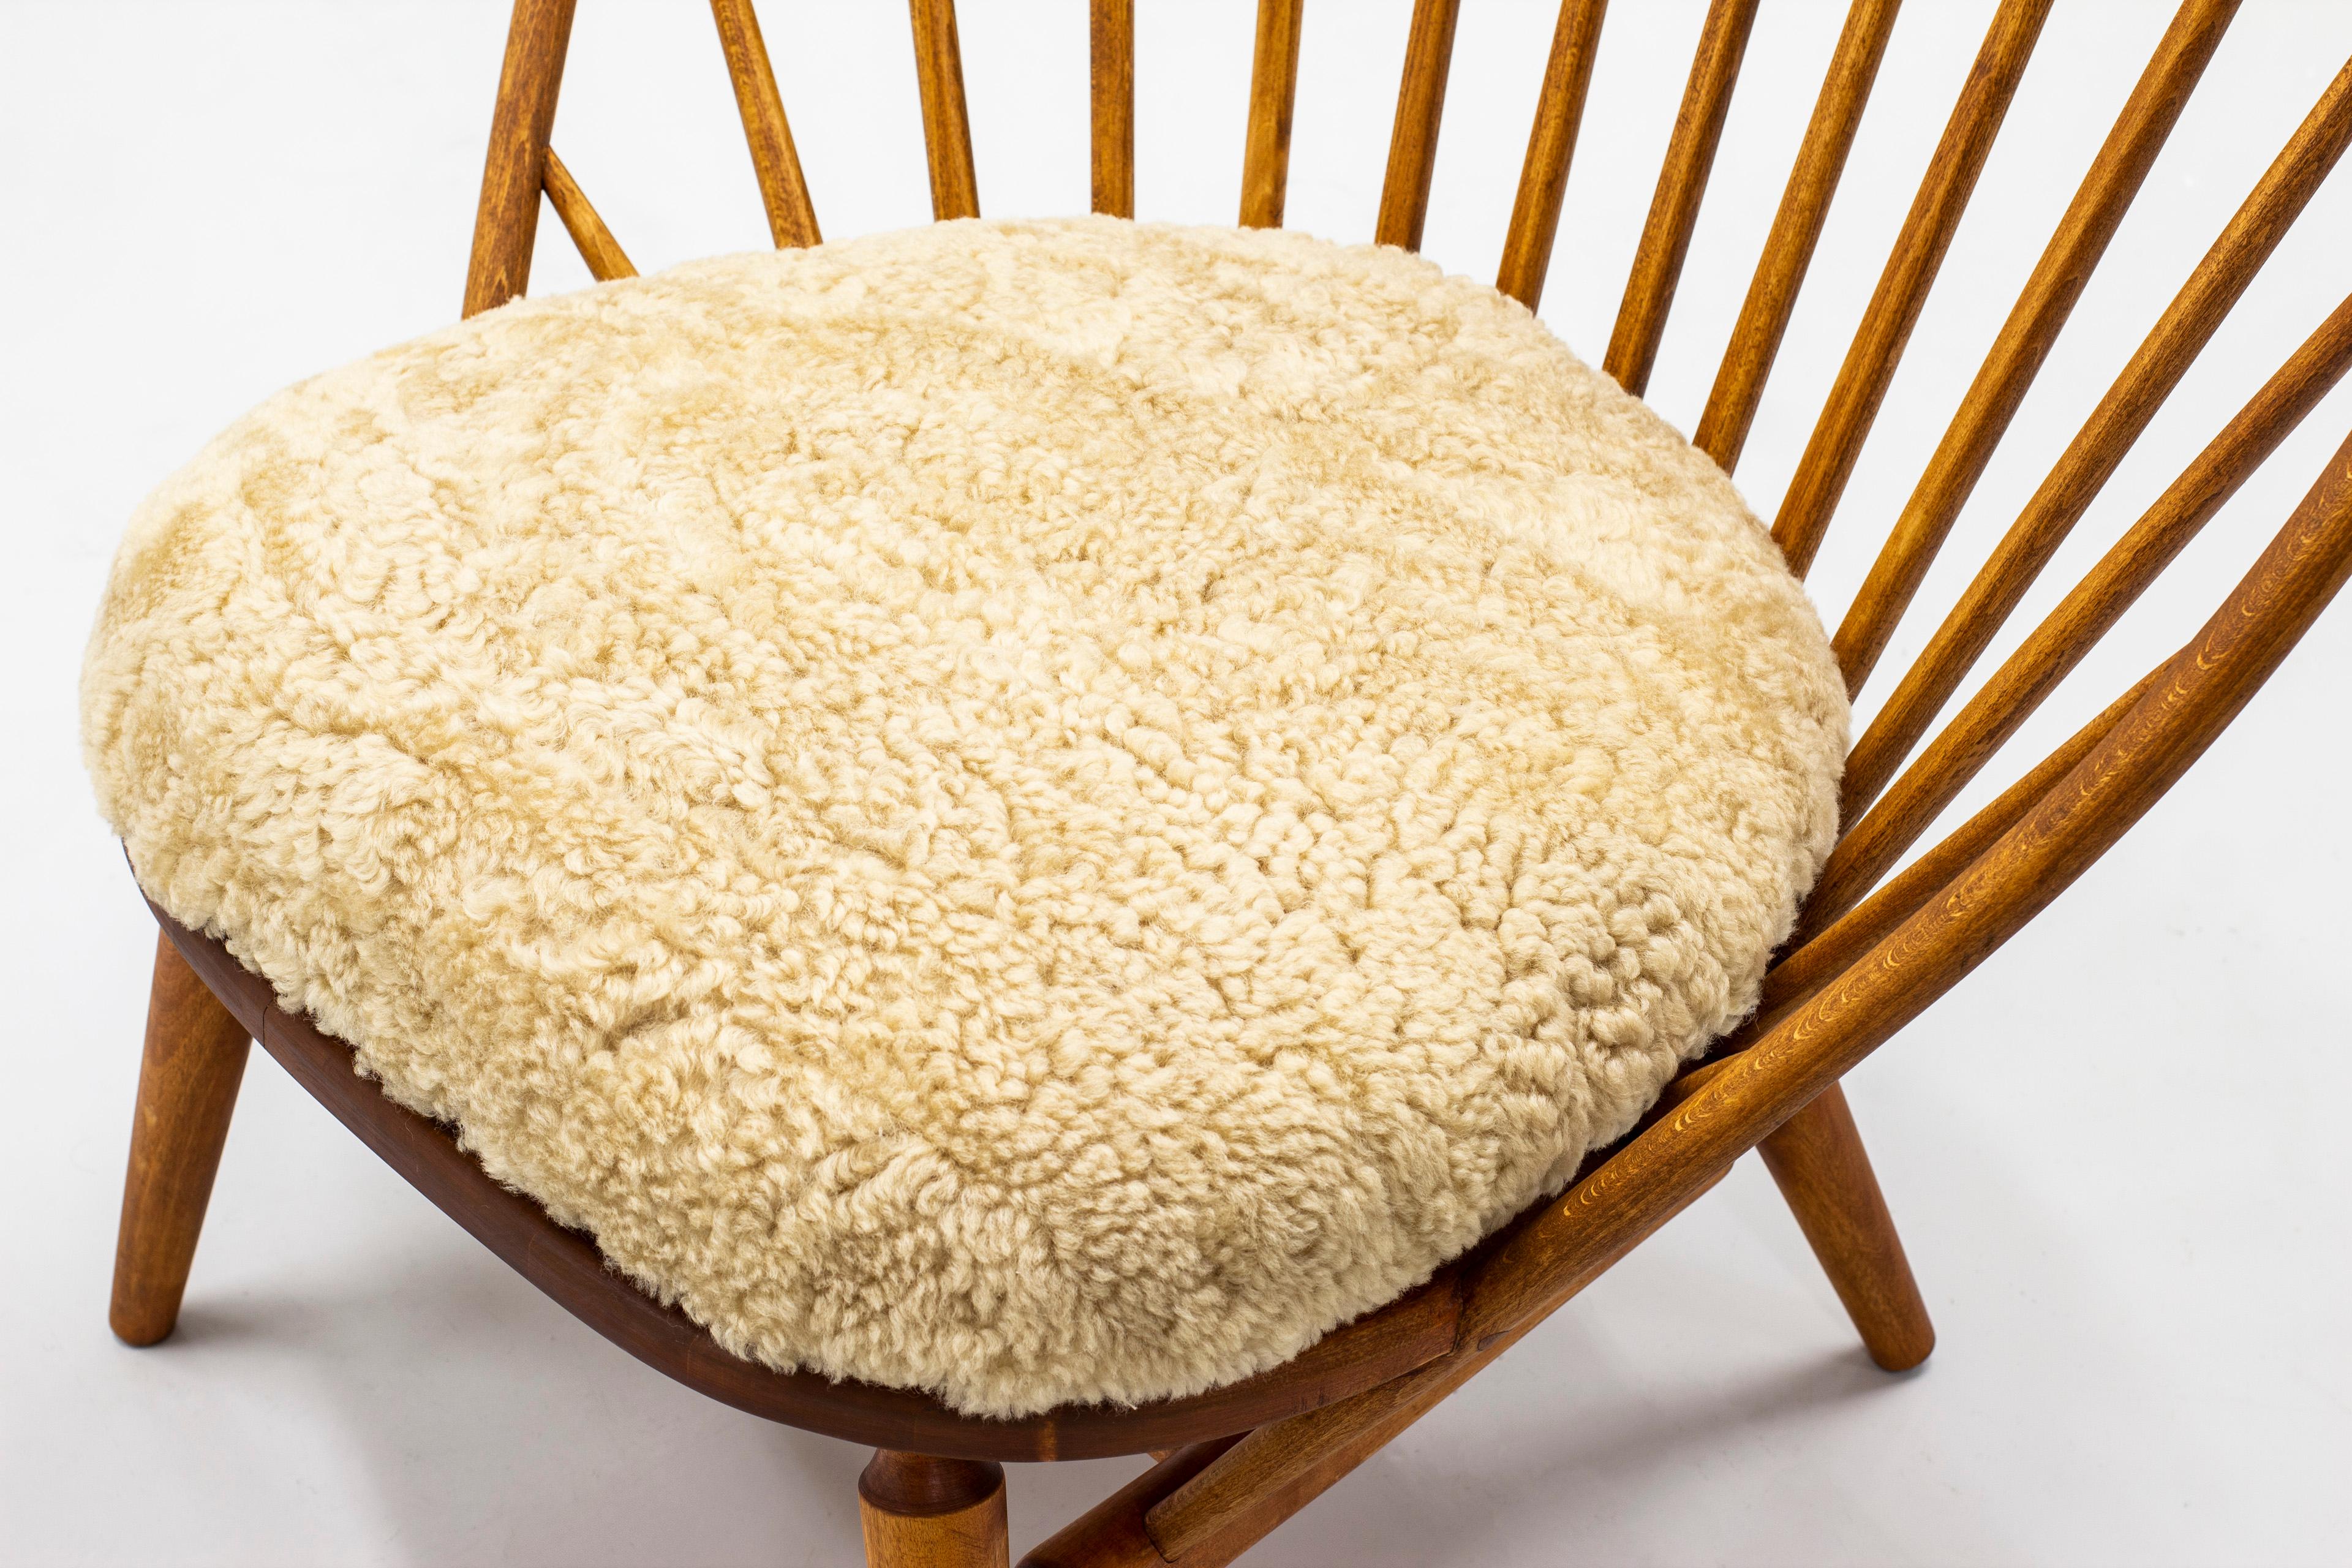 Mid-20th Century Lounge Chair with Sheep Skin Seat by Engström & Myrstrand, Sweden, 1950s